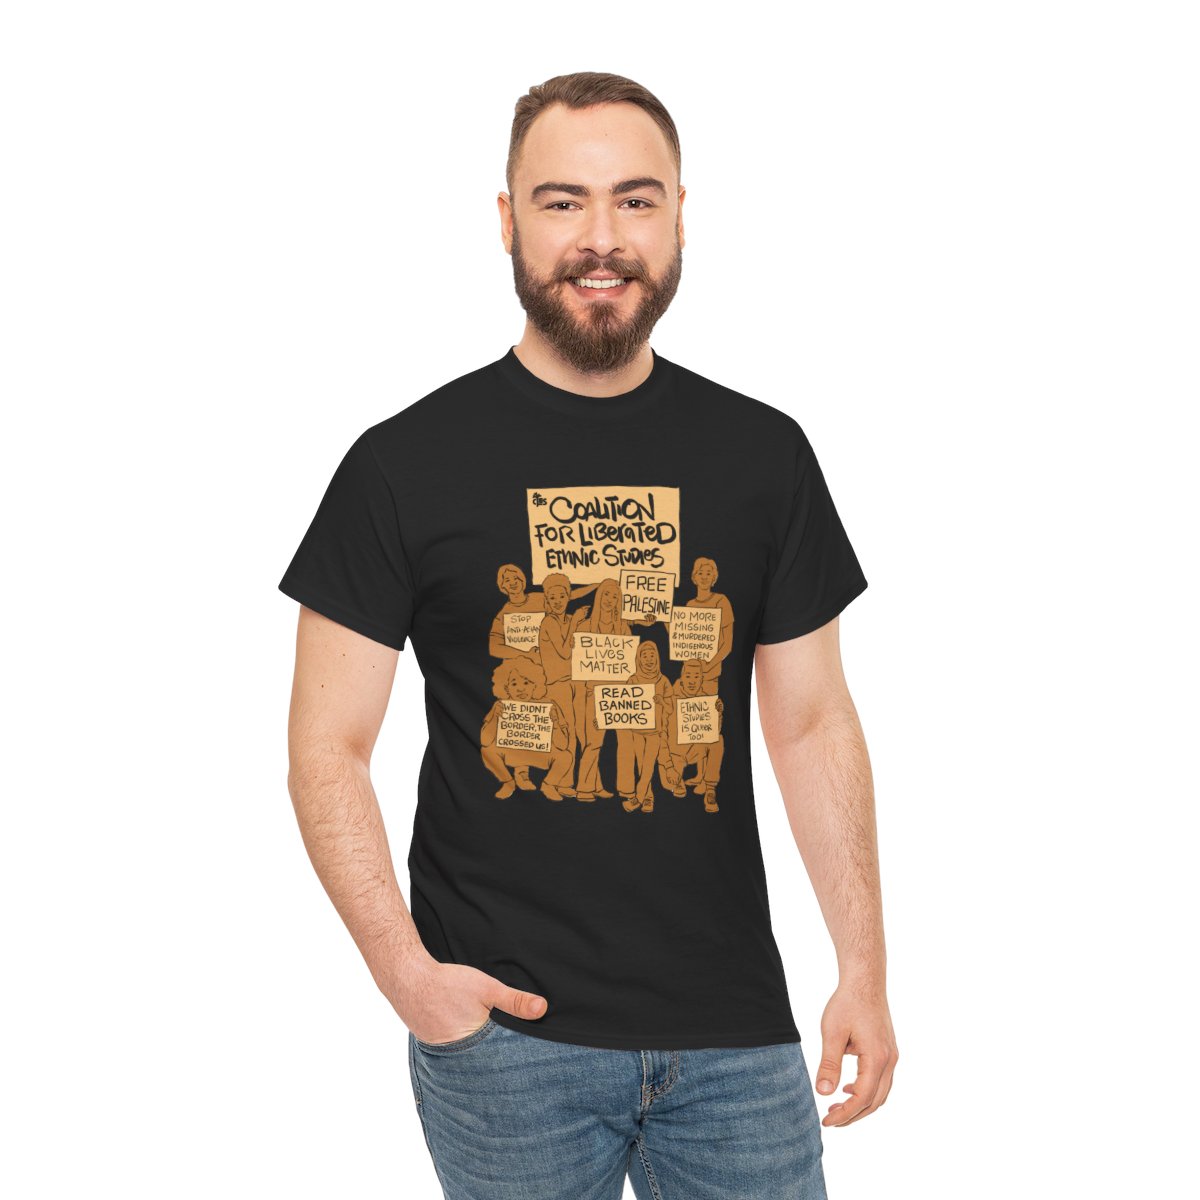 Coalition for Liberated Ethnic Studies Graphic Tee in Collaboration with Robert Liu-Trujillo product thumbnail image